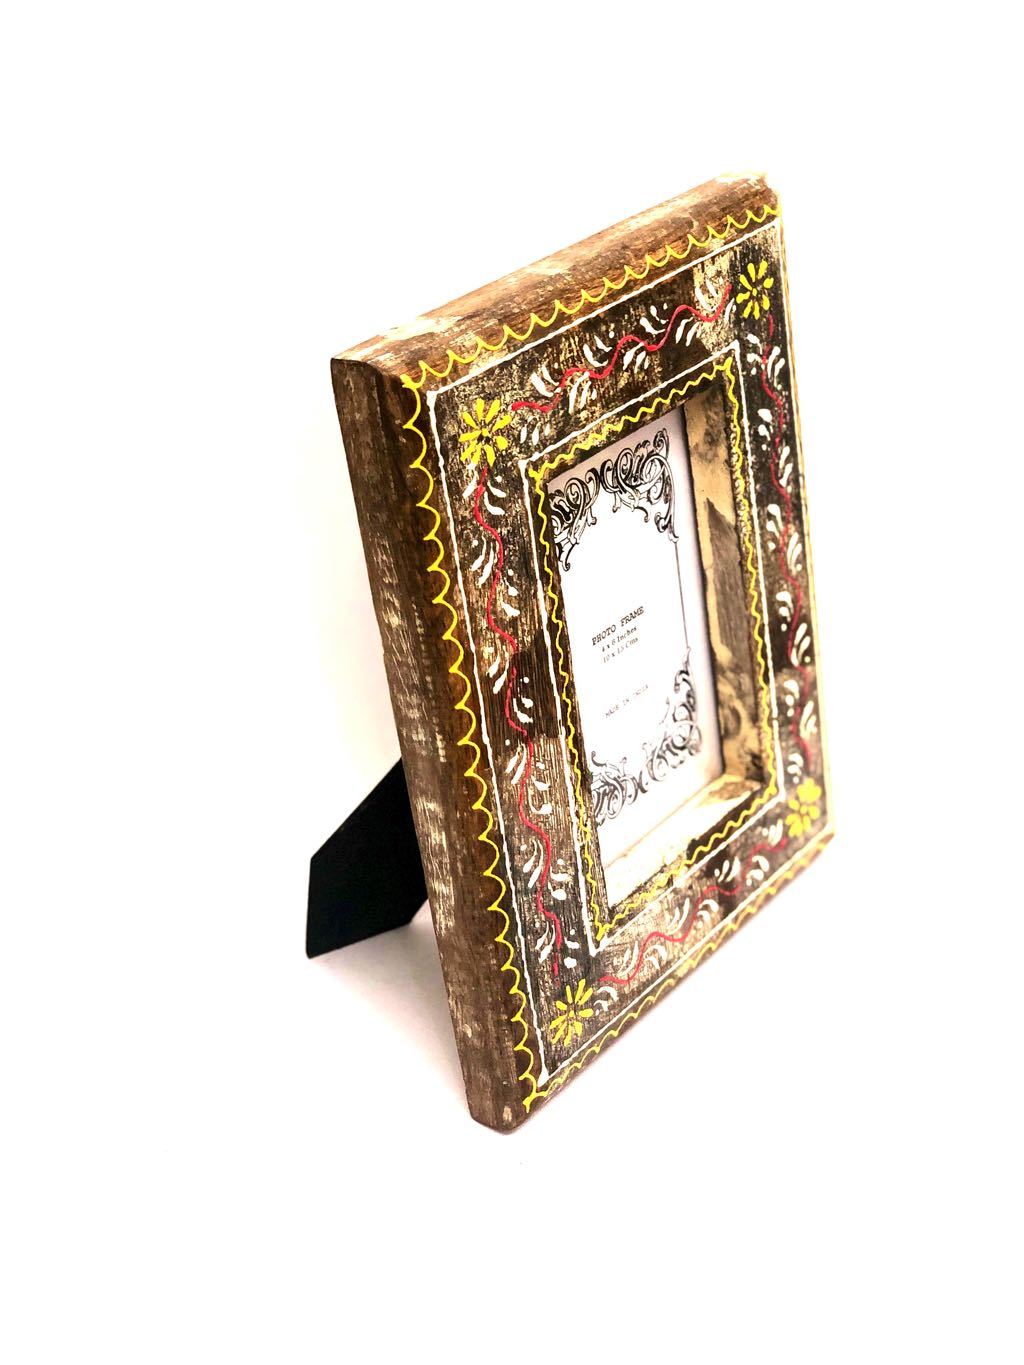 Traditional Multi Color Hand Painted Photo Frame Glass Front Tamrapatra